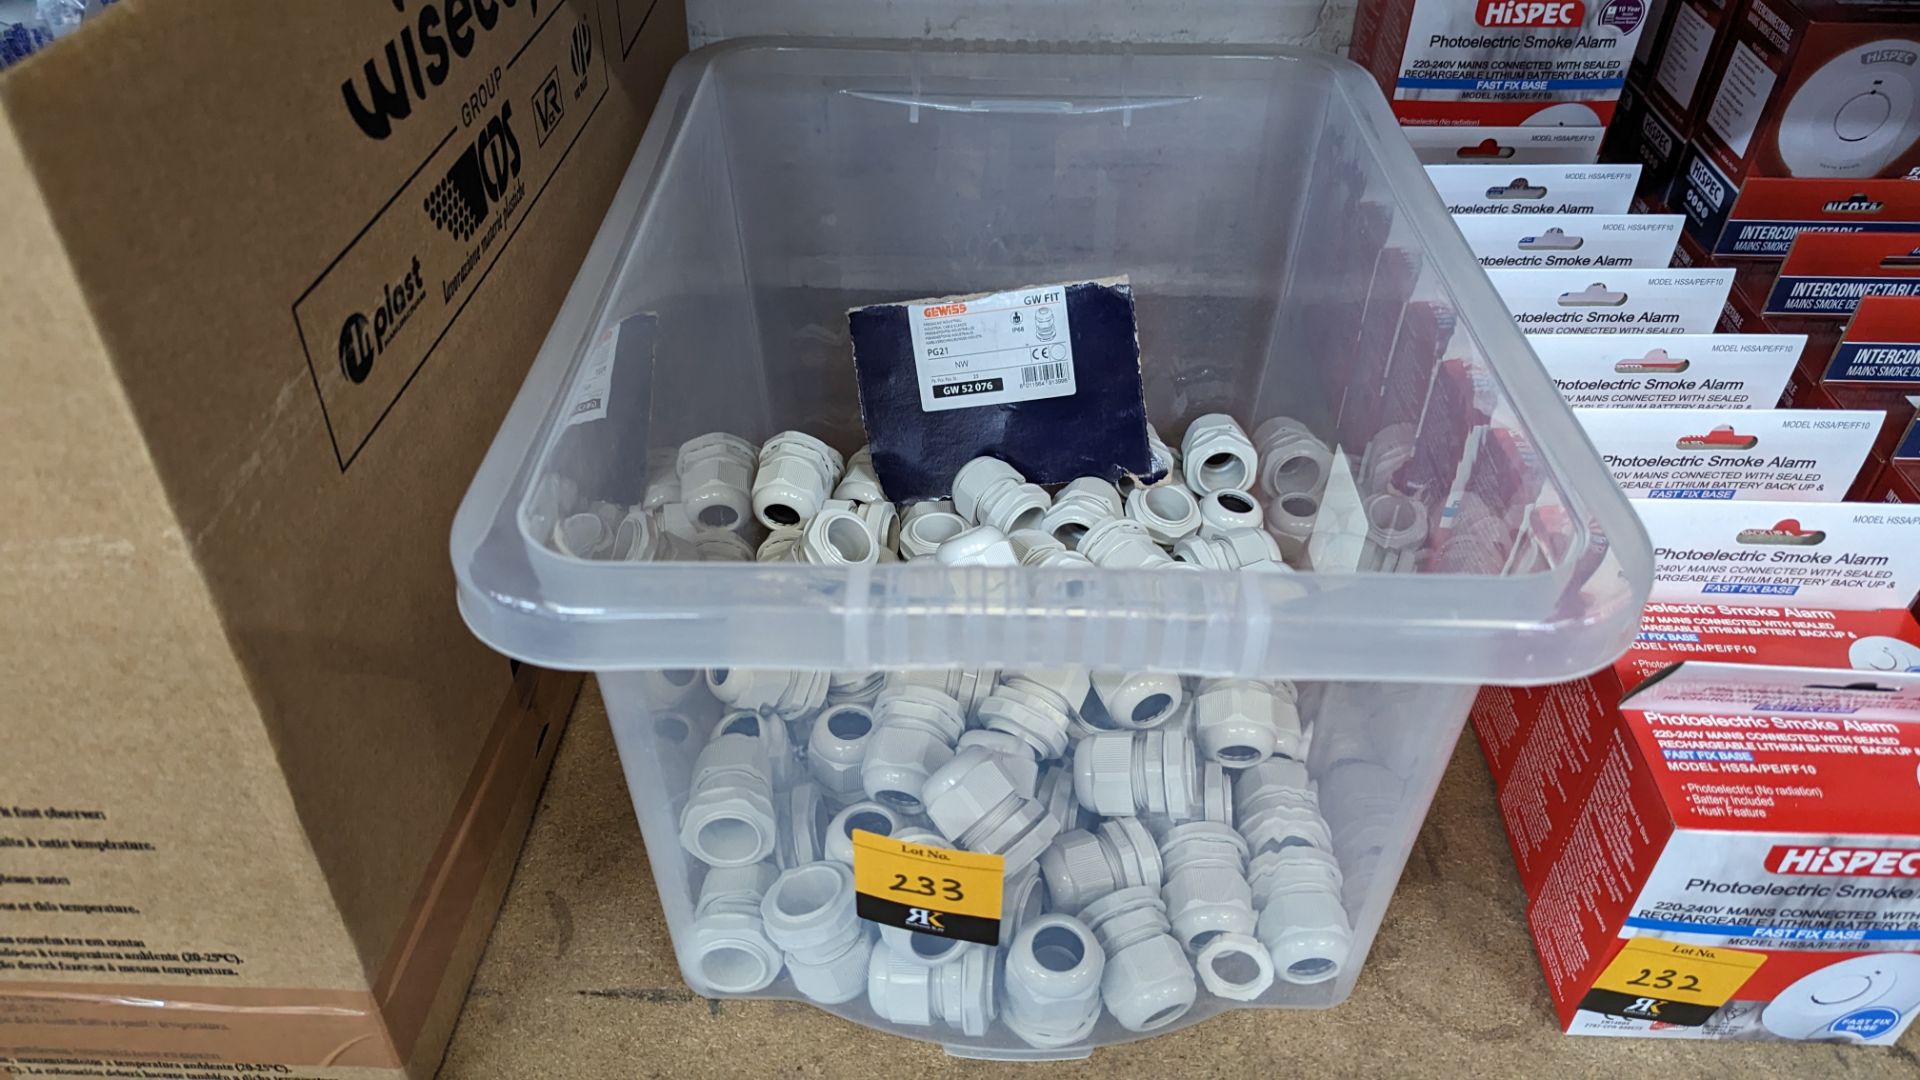 The contents of a crate of industrial cable glands